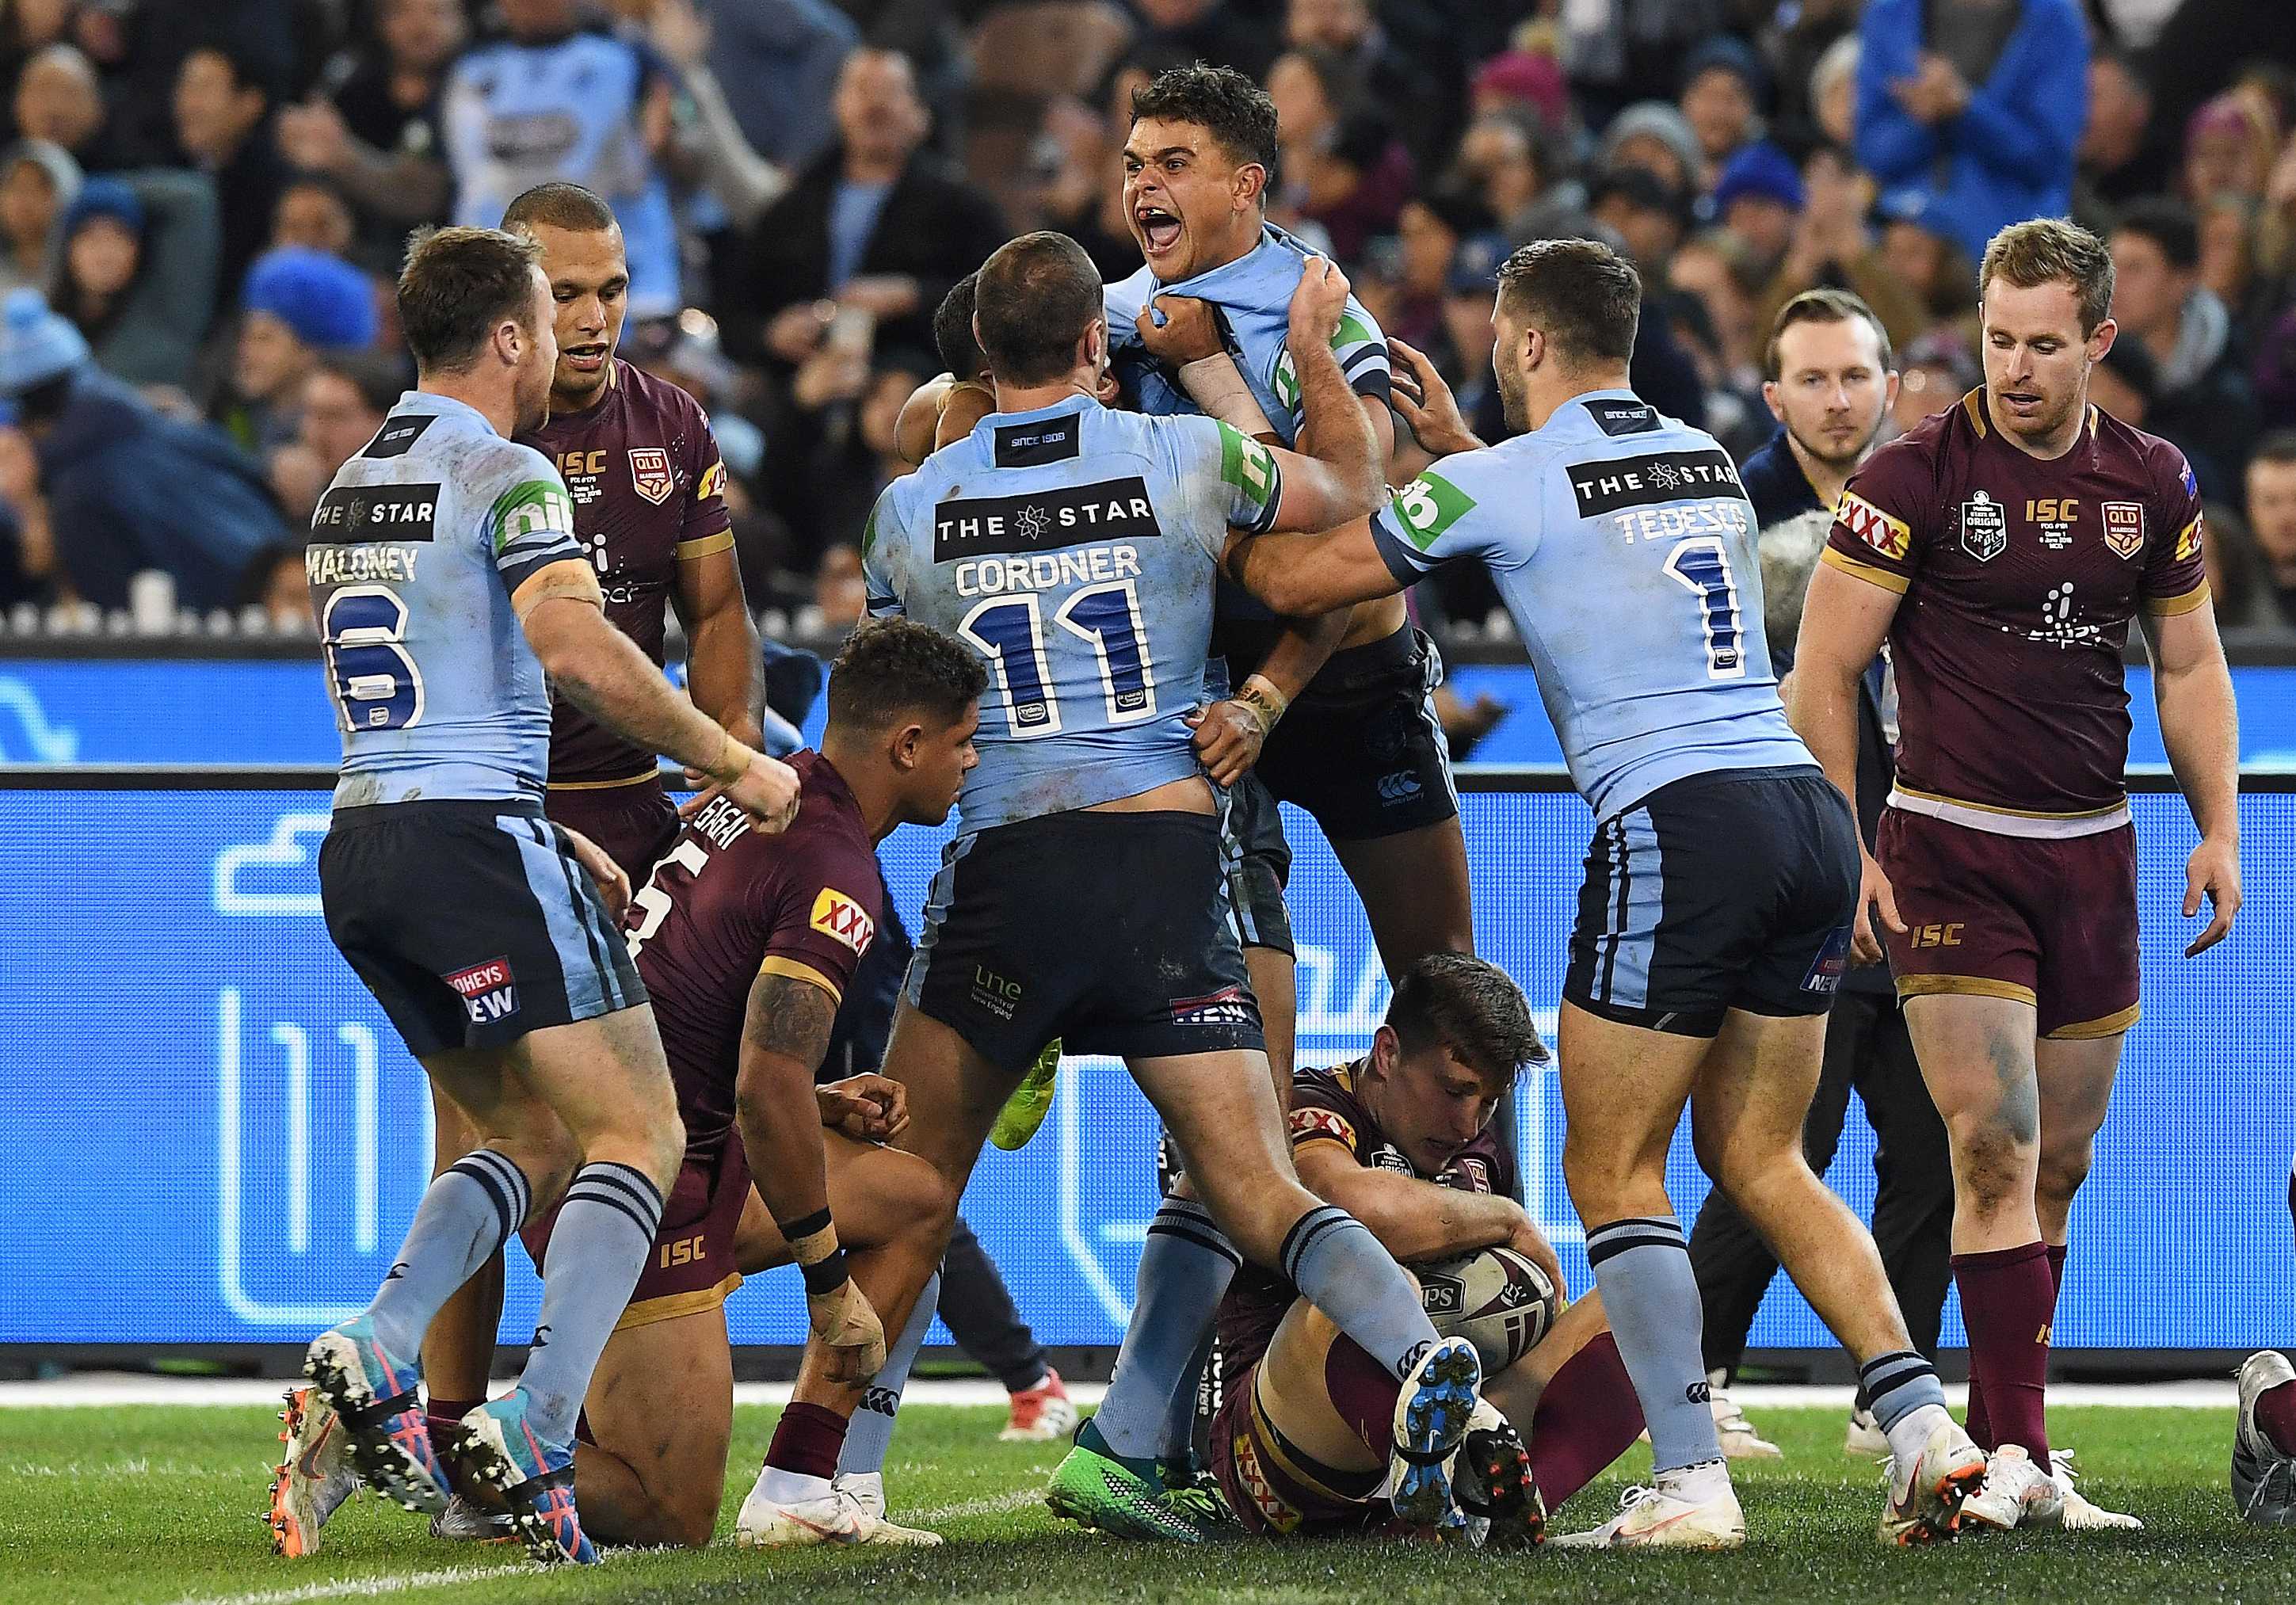 State of Origin New South Wales and Queensland kick-start new era for rugby league showpiece